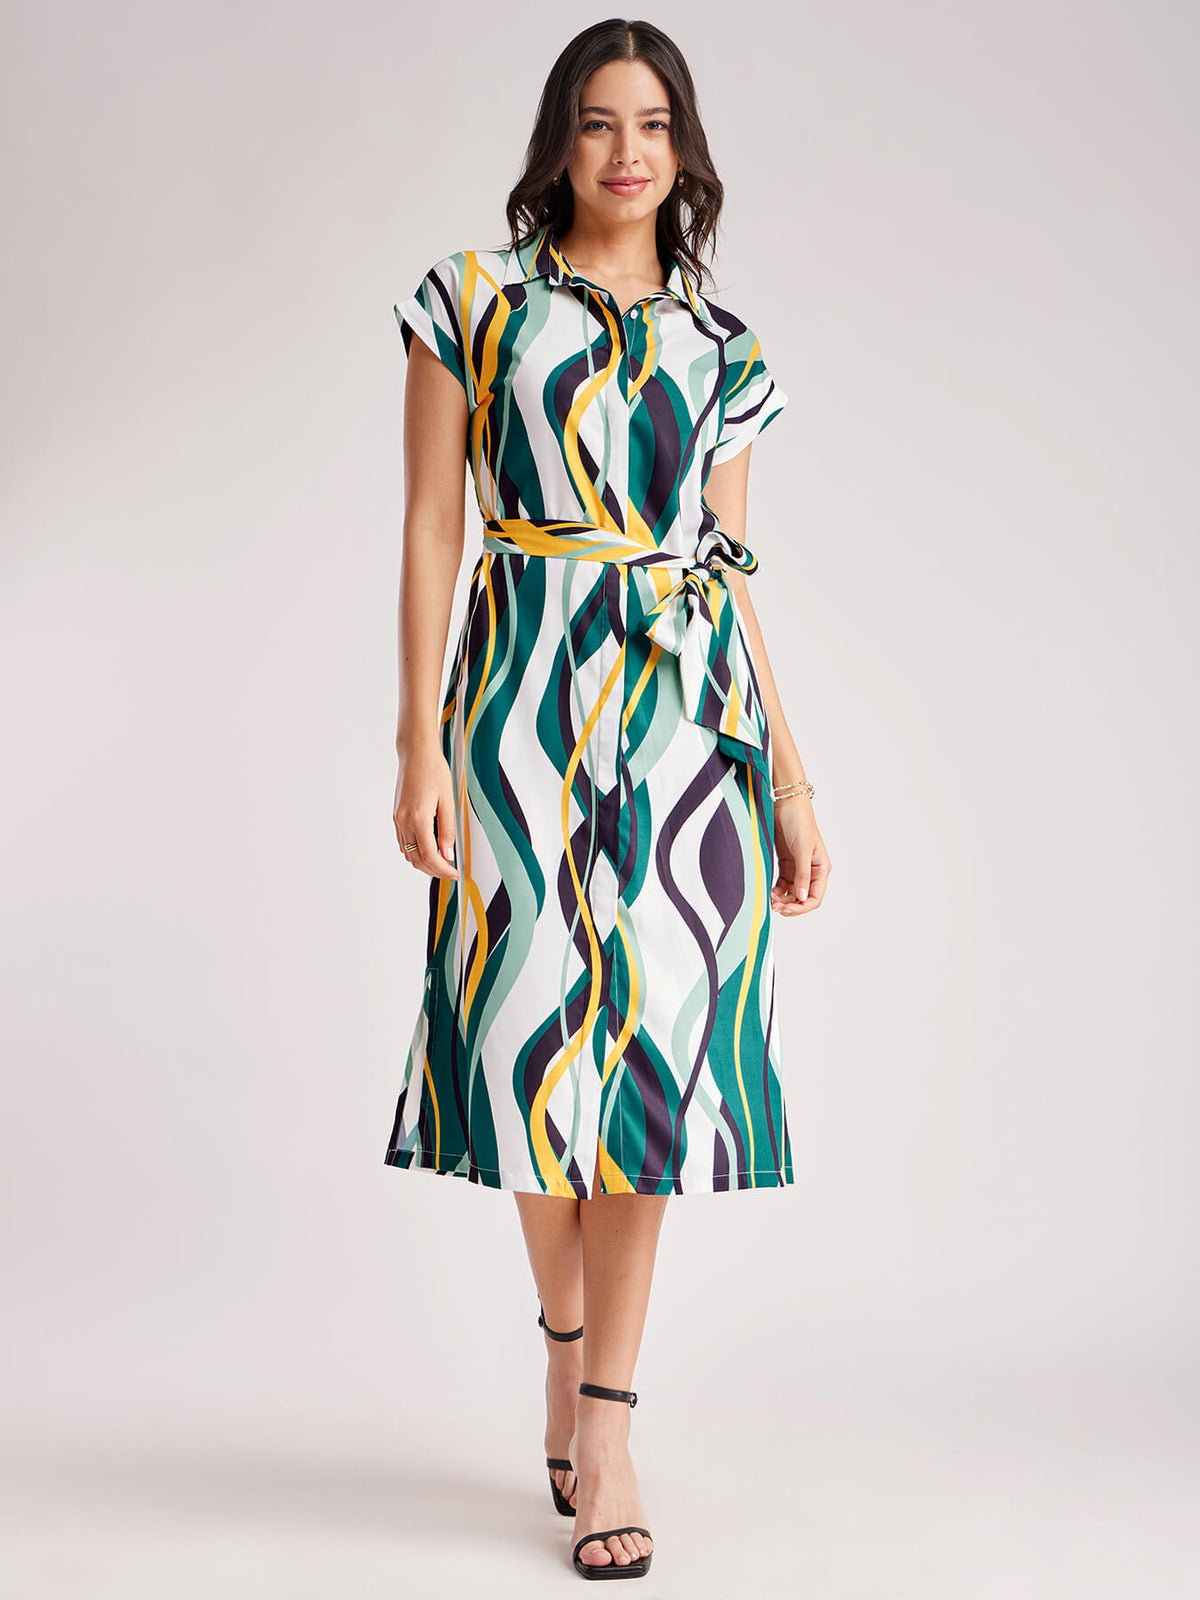 Abstract Drop Shoulder Dress - White And Teal